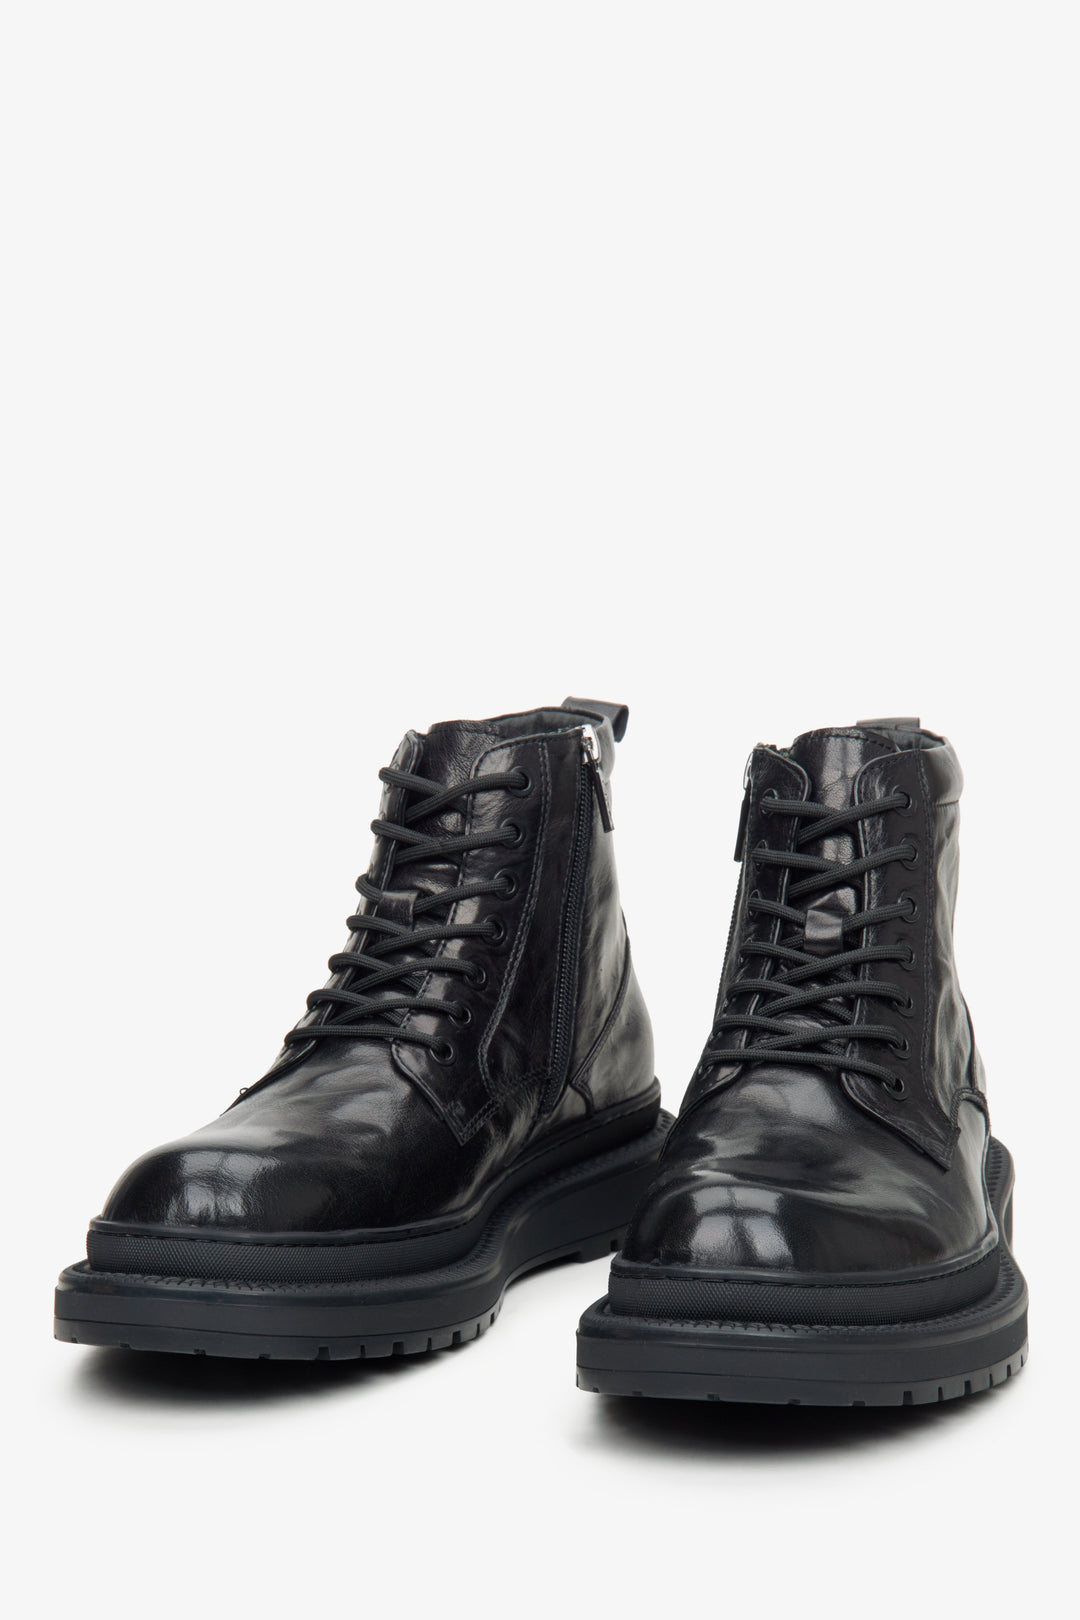 Men's warm black boots by Estro made of glossy genuine leather.